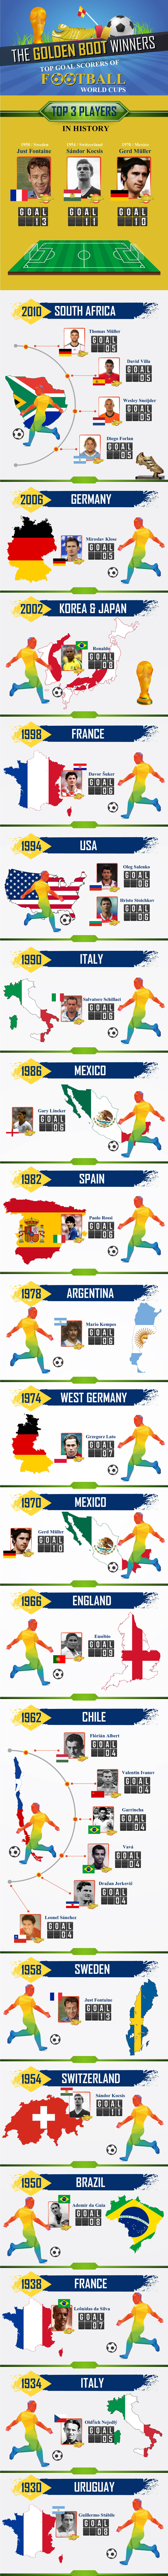 Golden Boot Winners World Cup Infographic